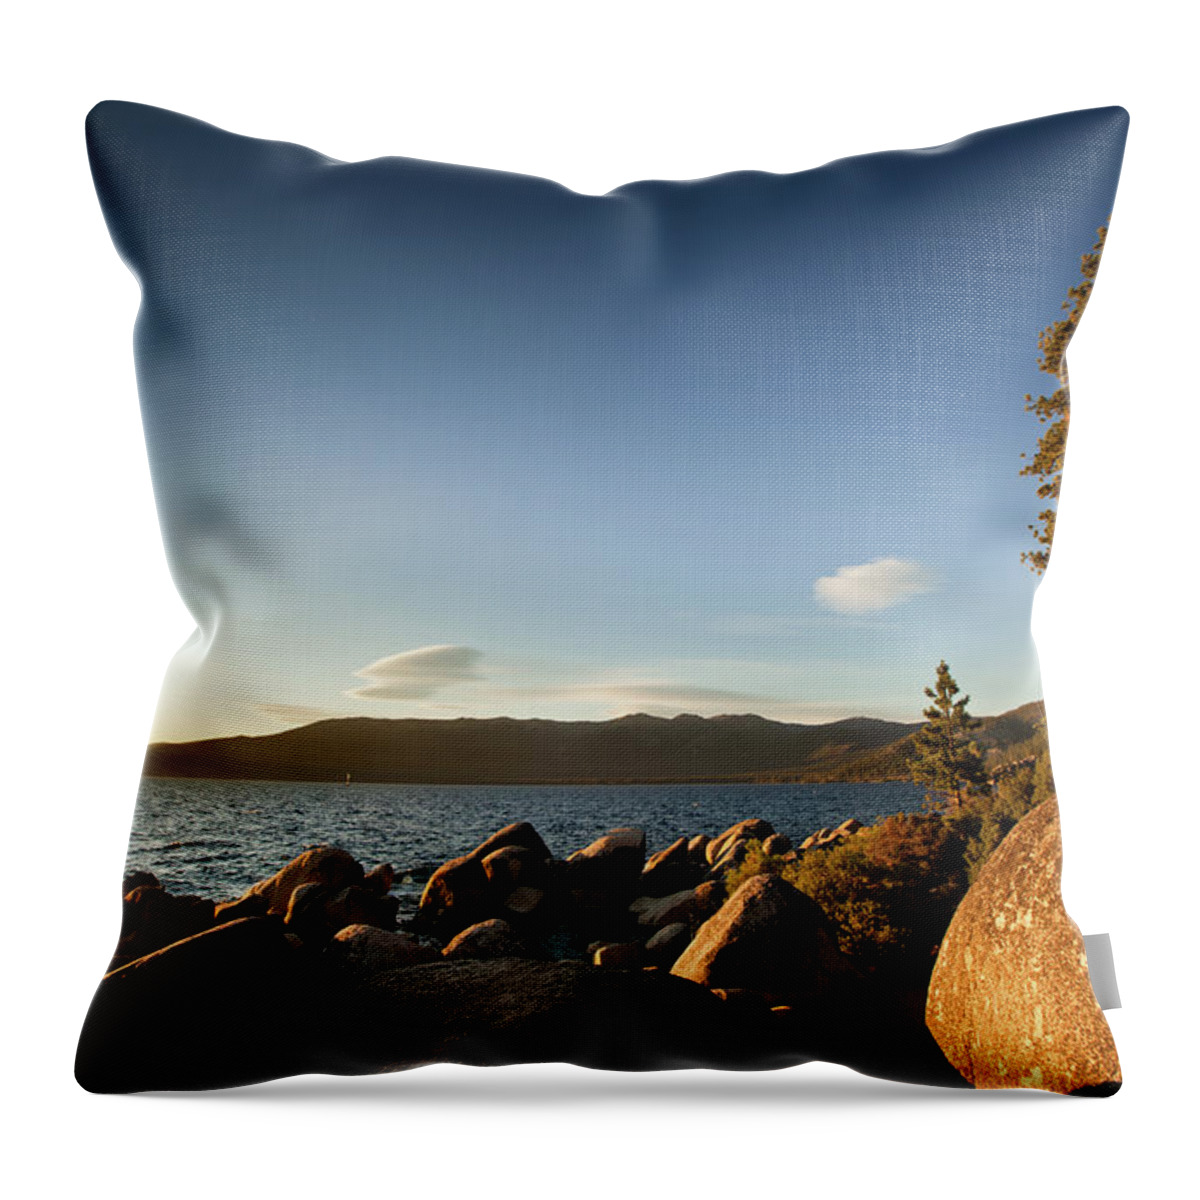 Lakeshore Throw Pillow featuring the photograph Sand Harbor State Beach, Lake Tahoe by Halbergman